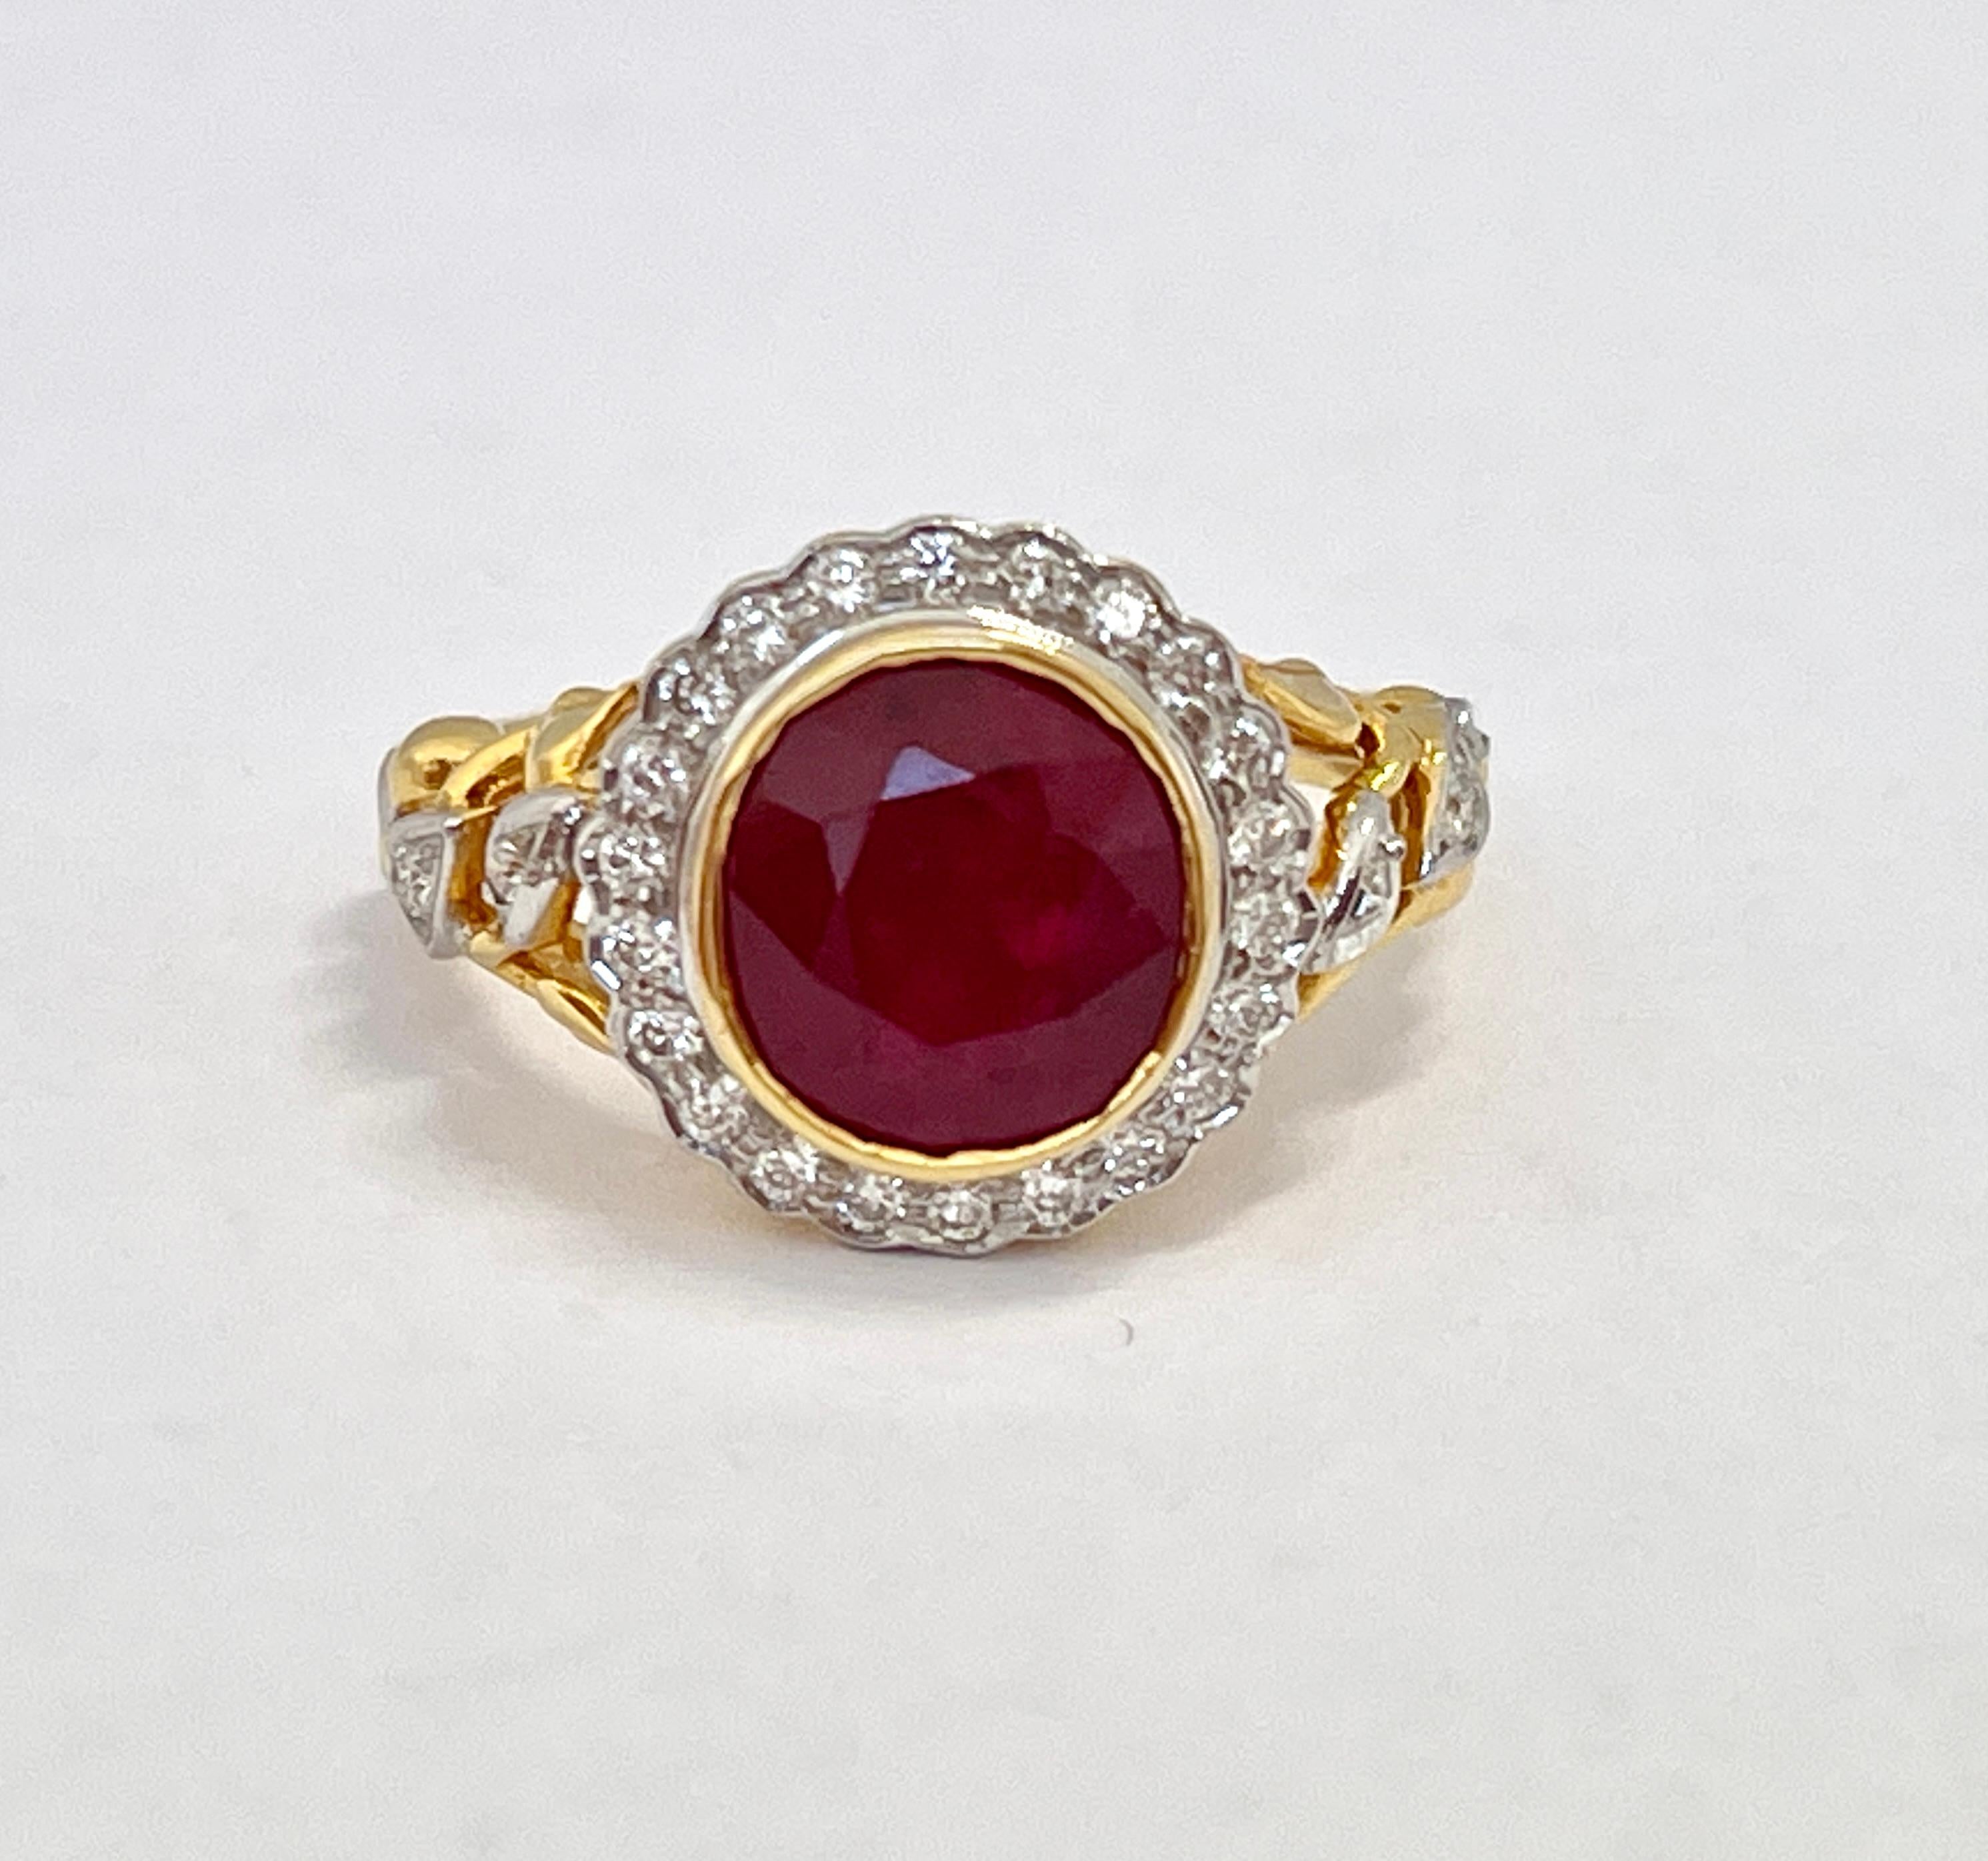 This ring is a true beauty.

It features a strong red, 3.54ct Burmese Ruby that does not show signs of any treatment.  This is rare for a modern day Ruby.  The colour is medium dark red with a bright hue and because the stone is untreated, it